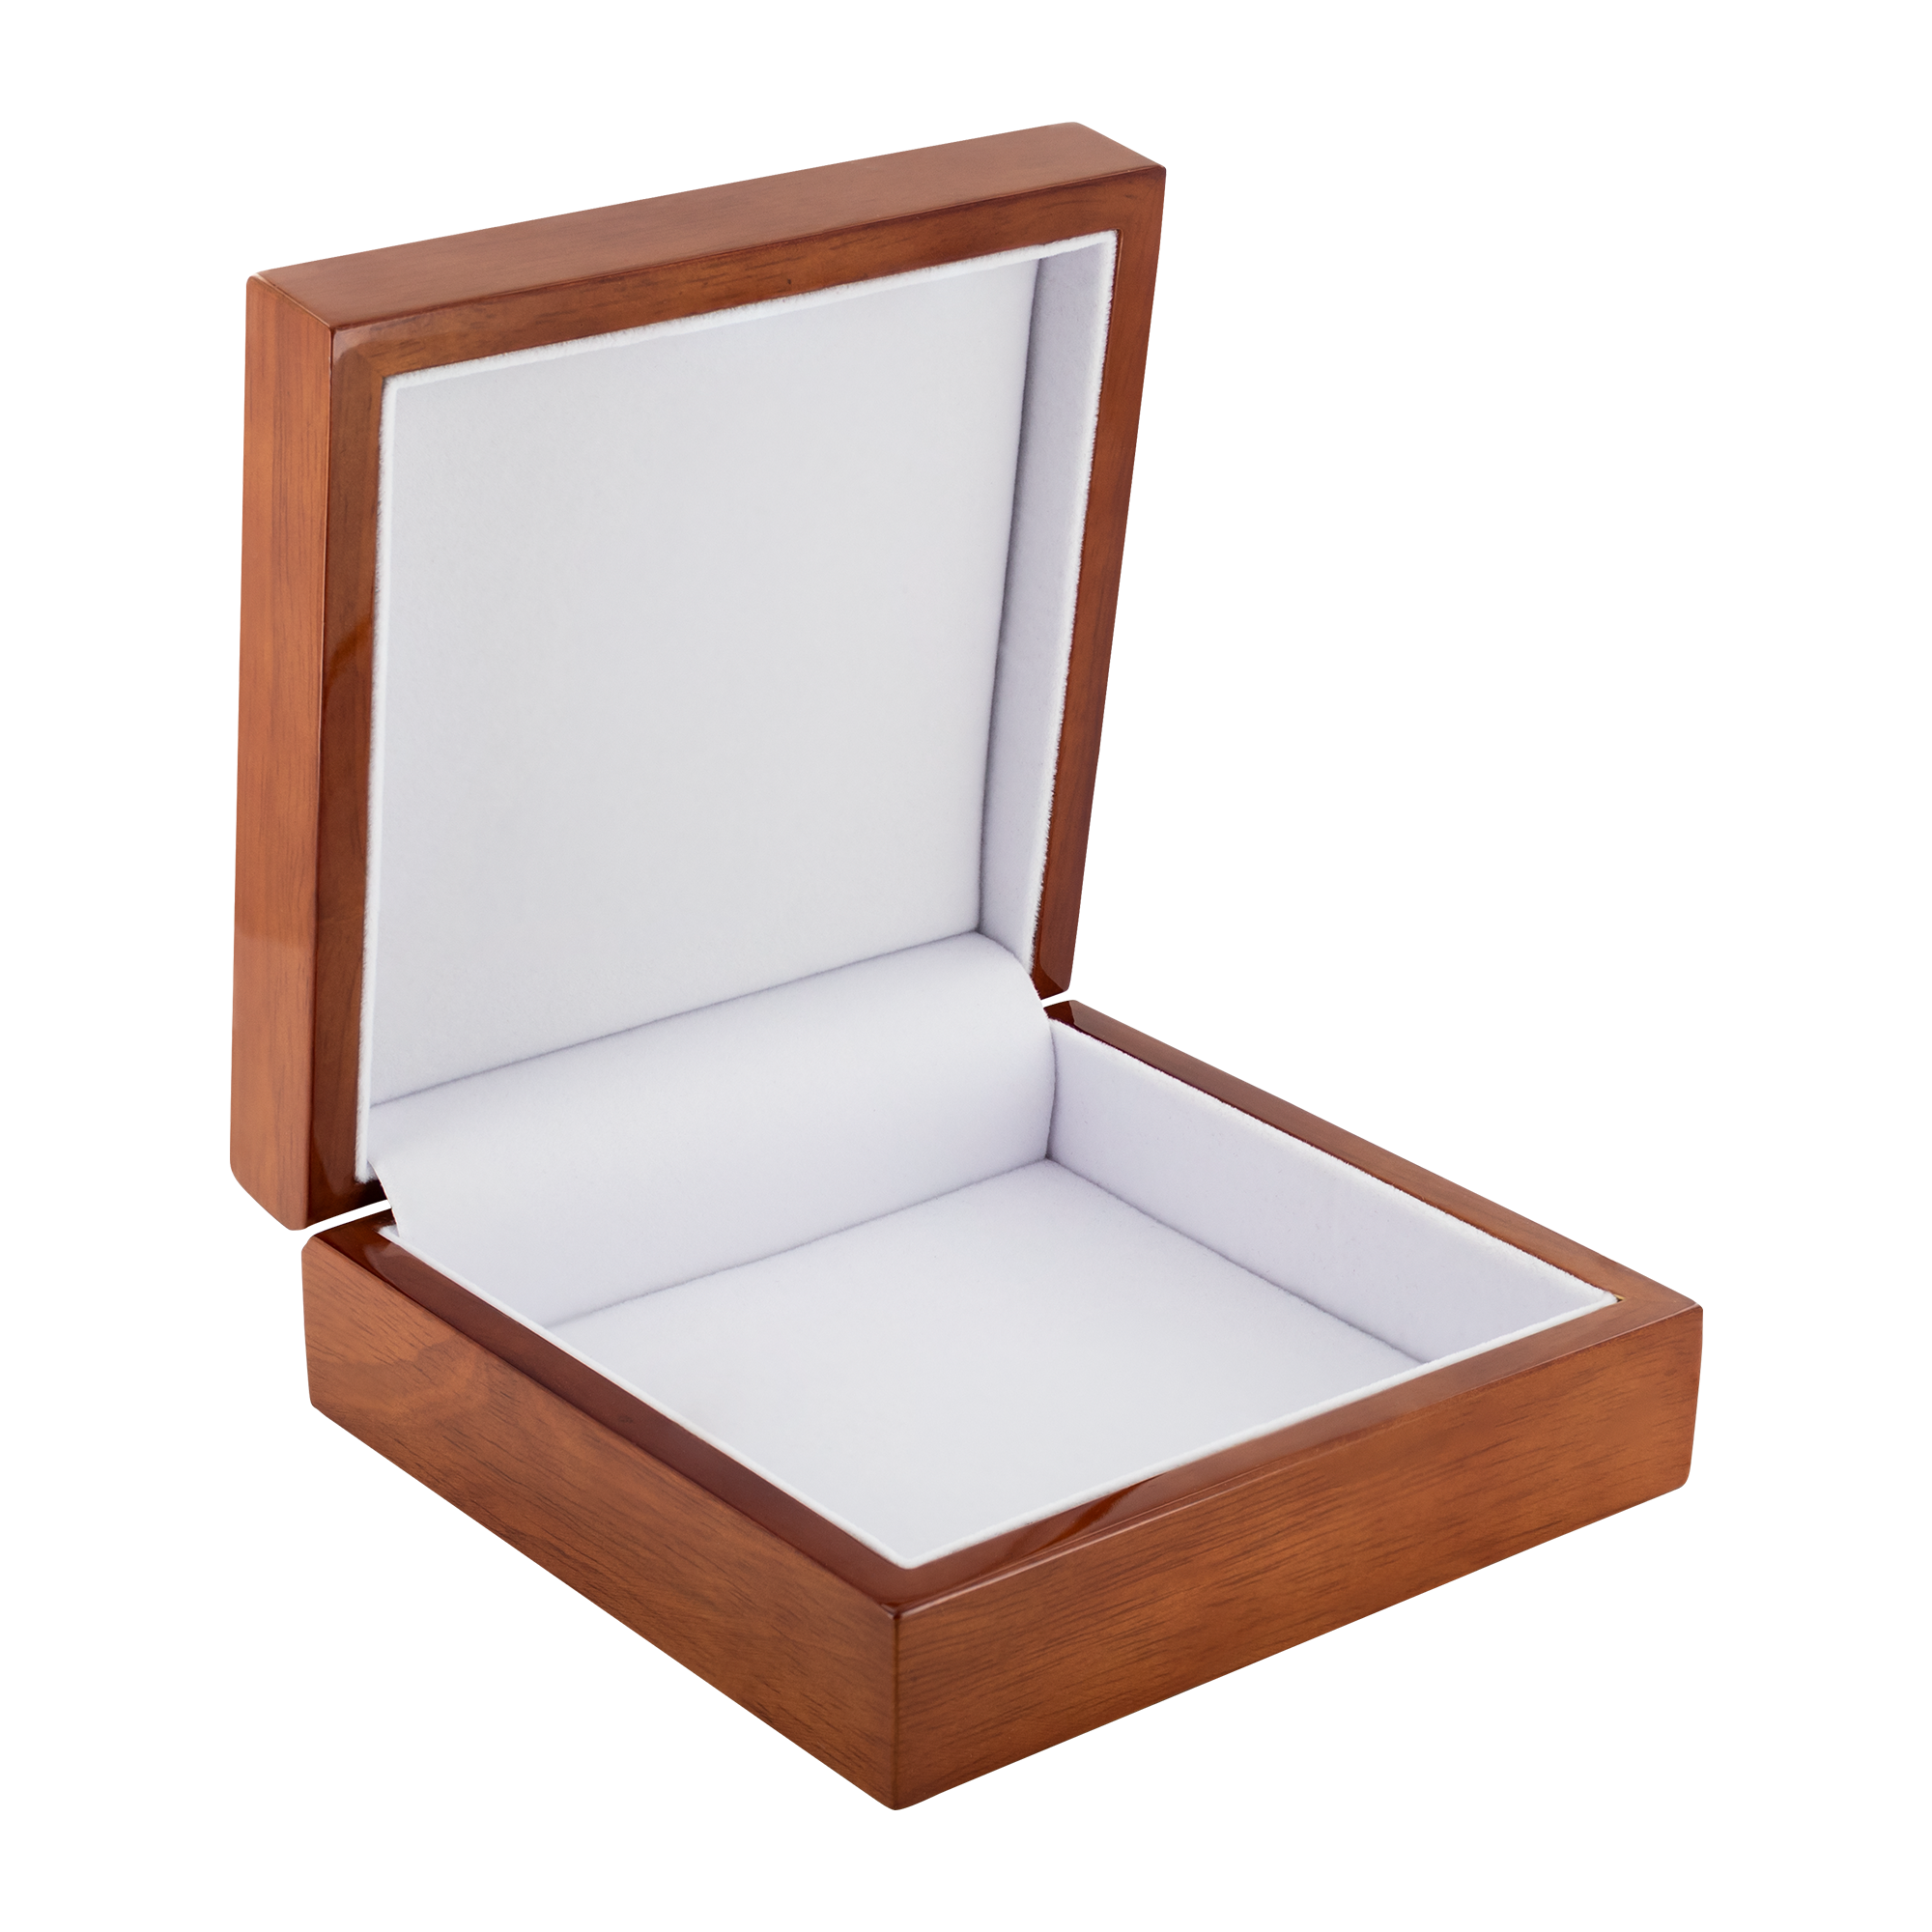 hzrd Genuine Wood Crafted Jewelry Box